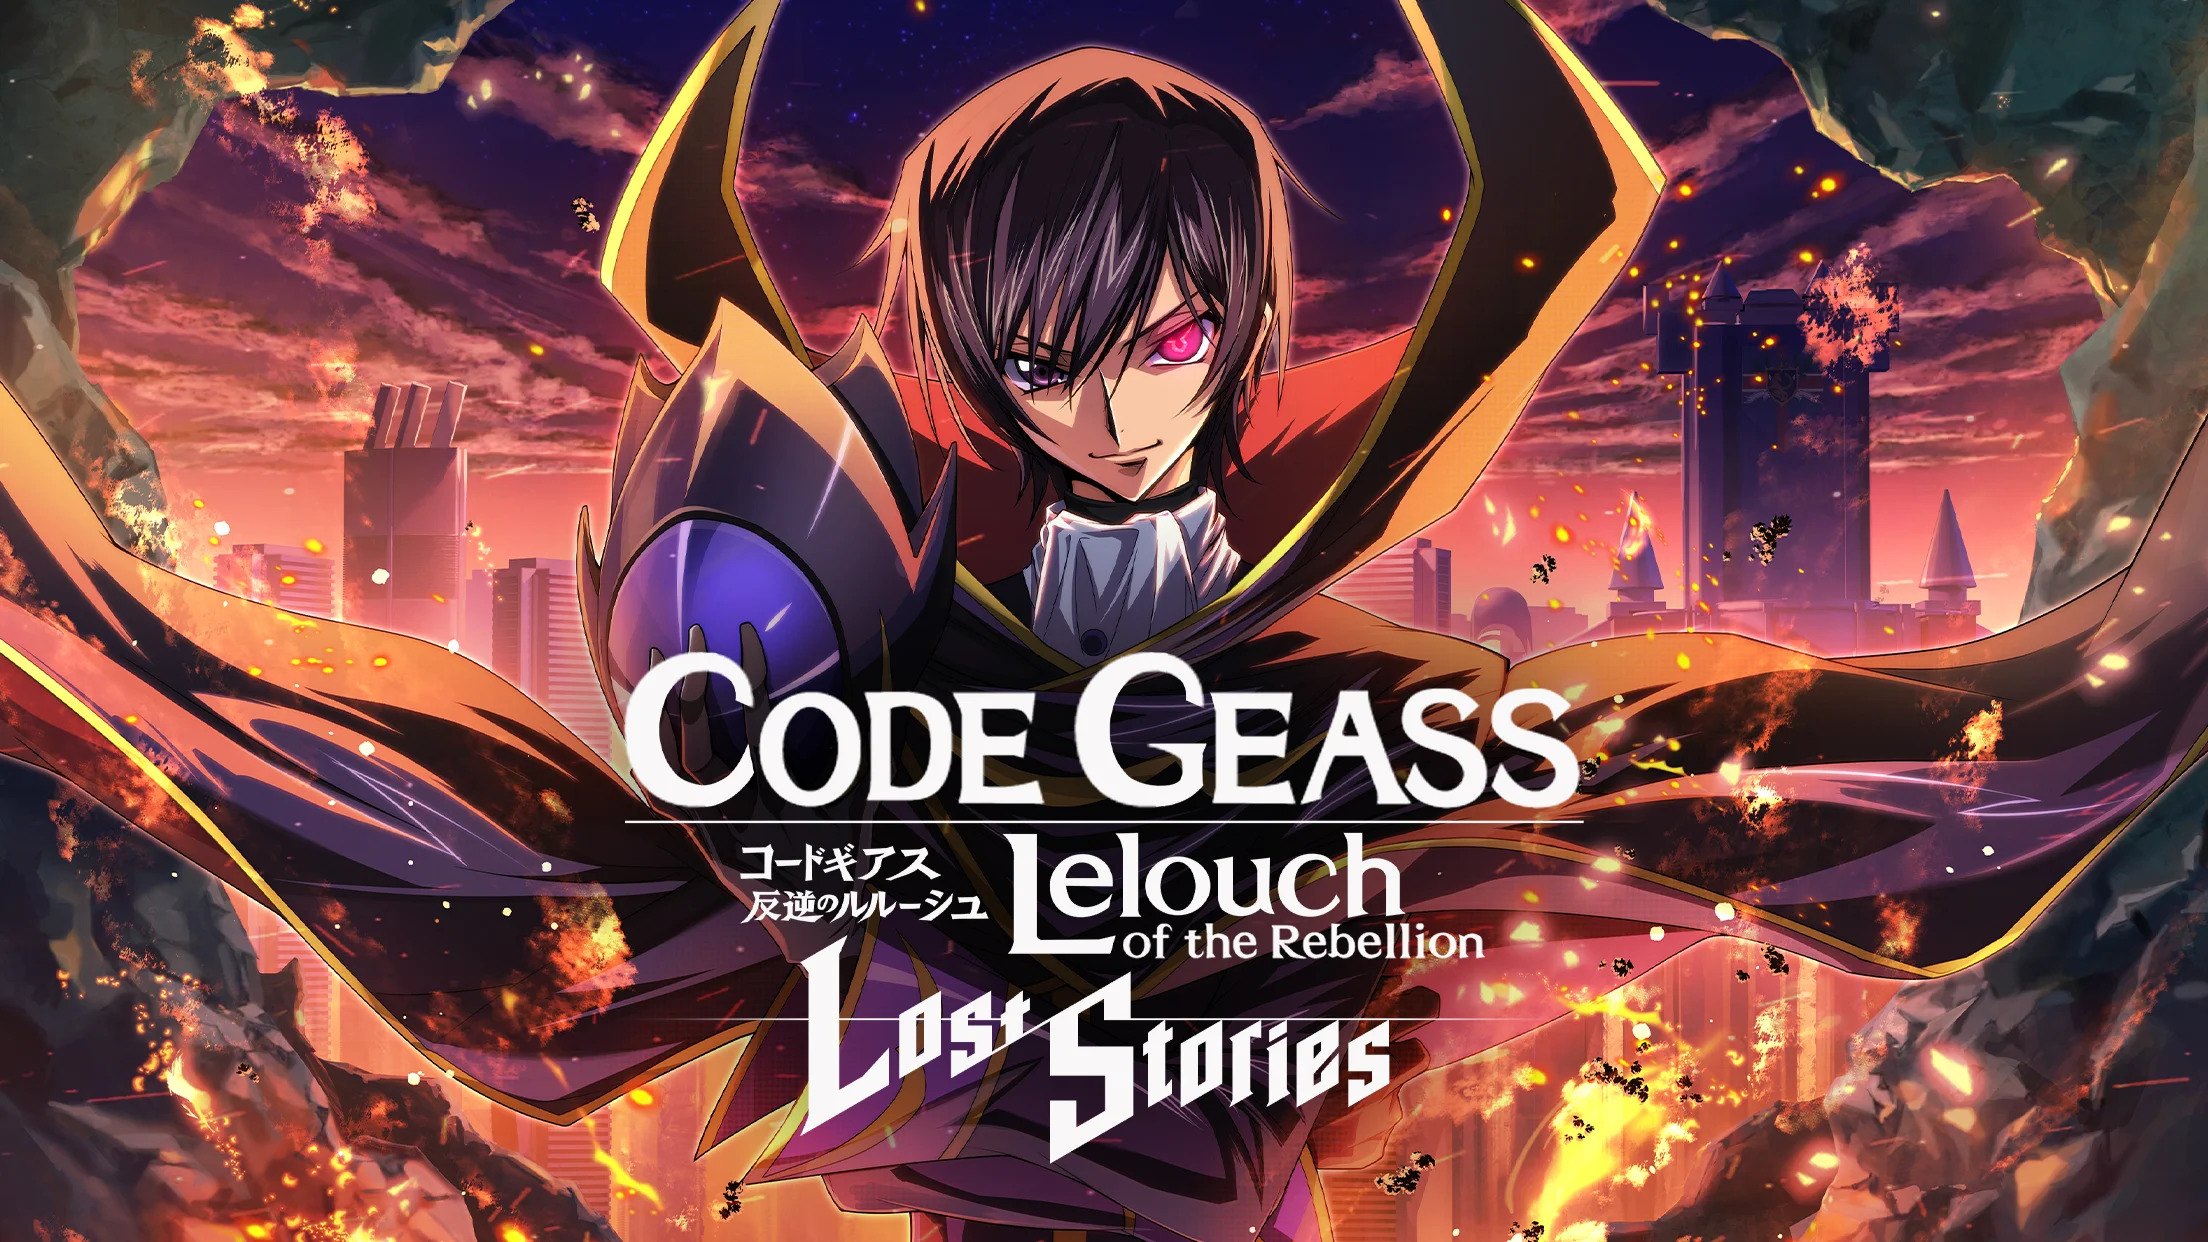 Upgrade Guide - Best Ways to Power-Up Characters in Code Geass: Lost Stories with BlueStacks